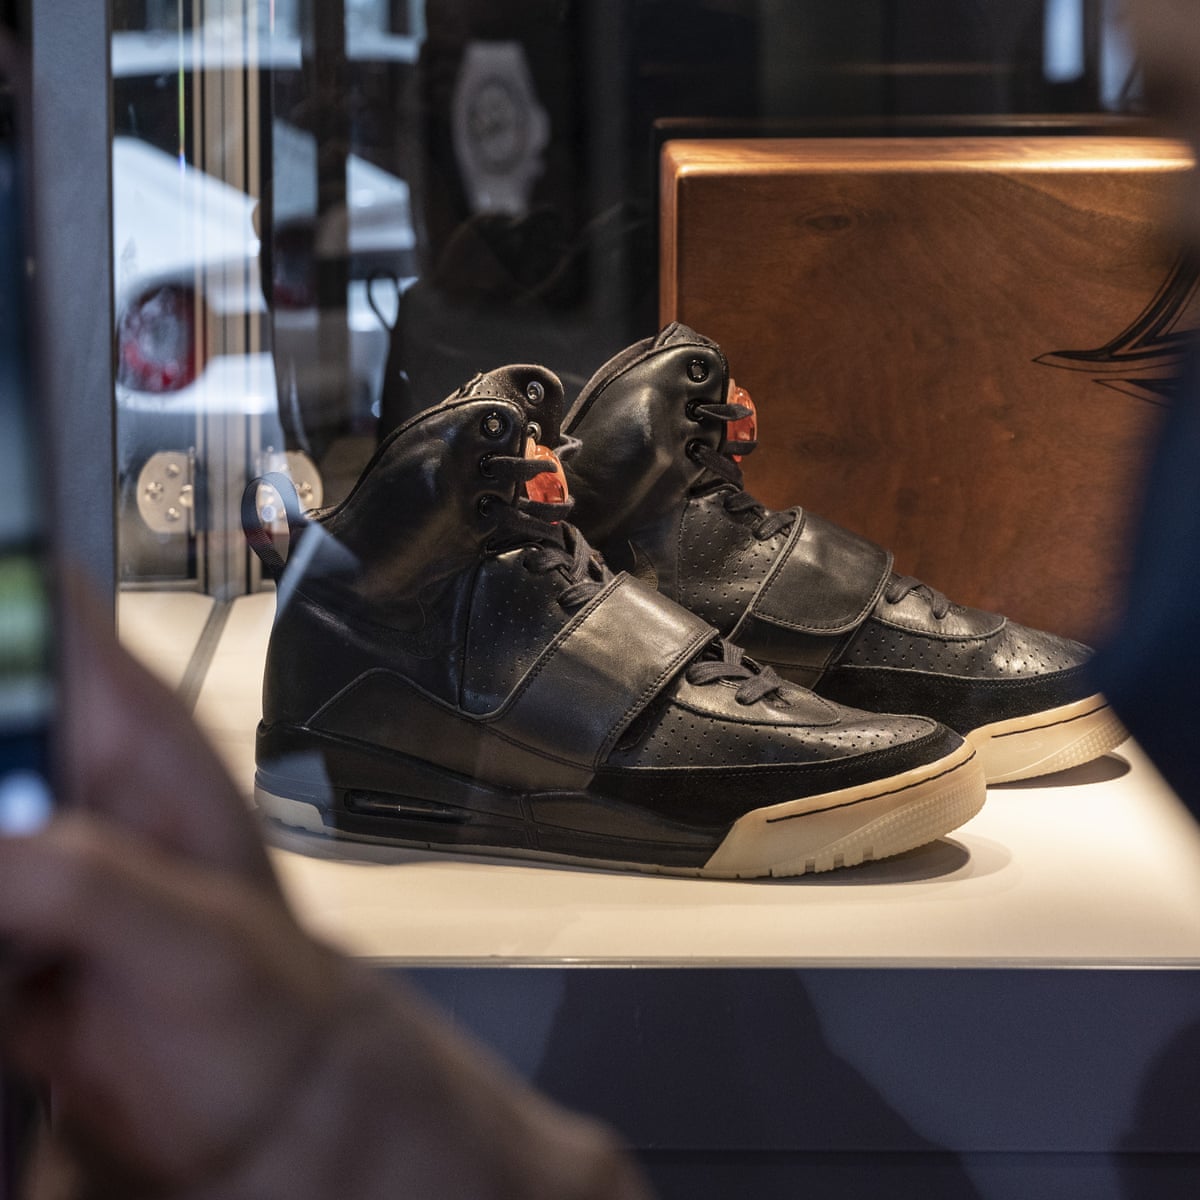 Kanye West's Air Yeezy sneakers up for auction at $1m, Fashion